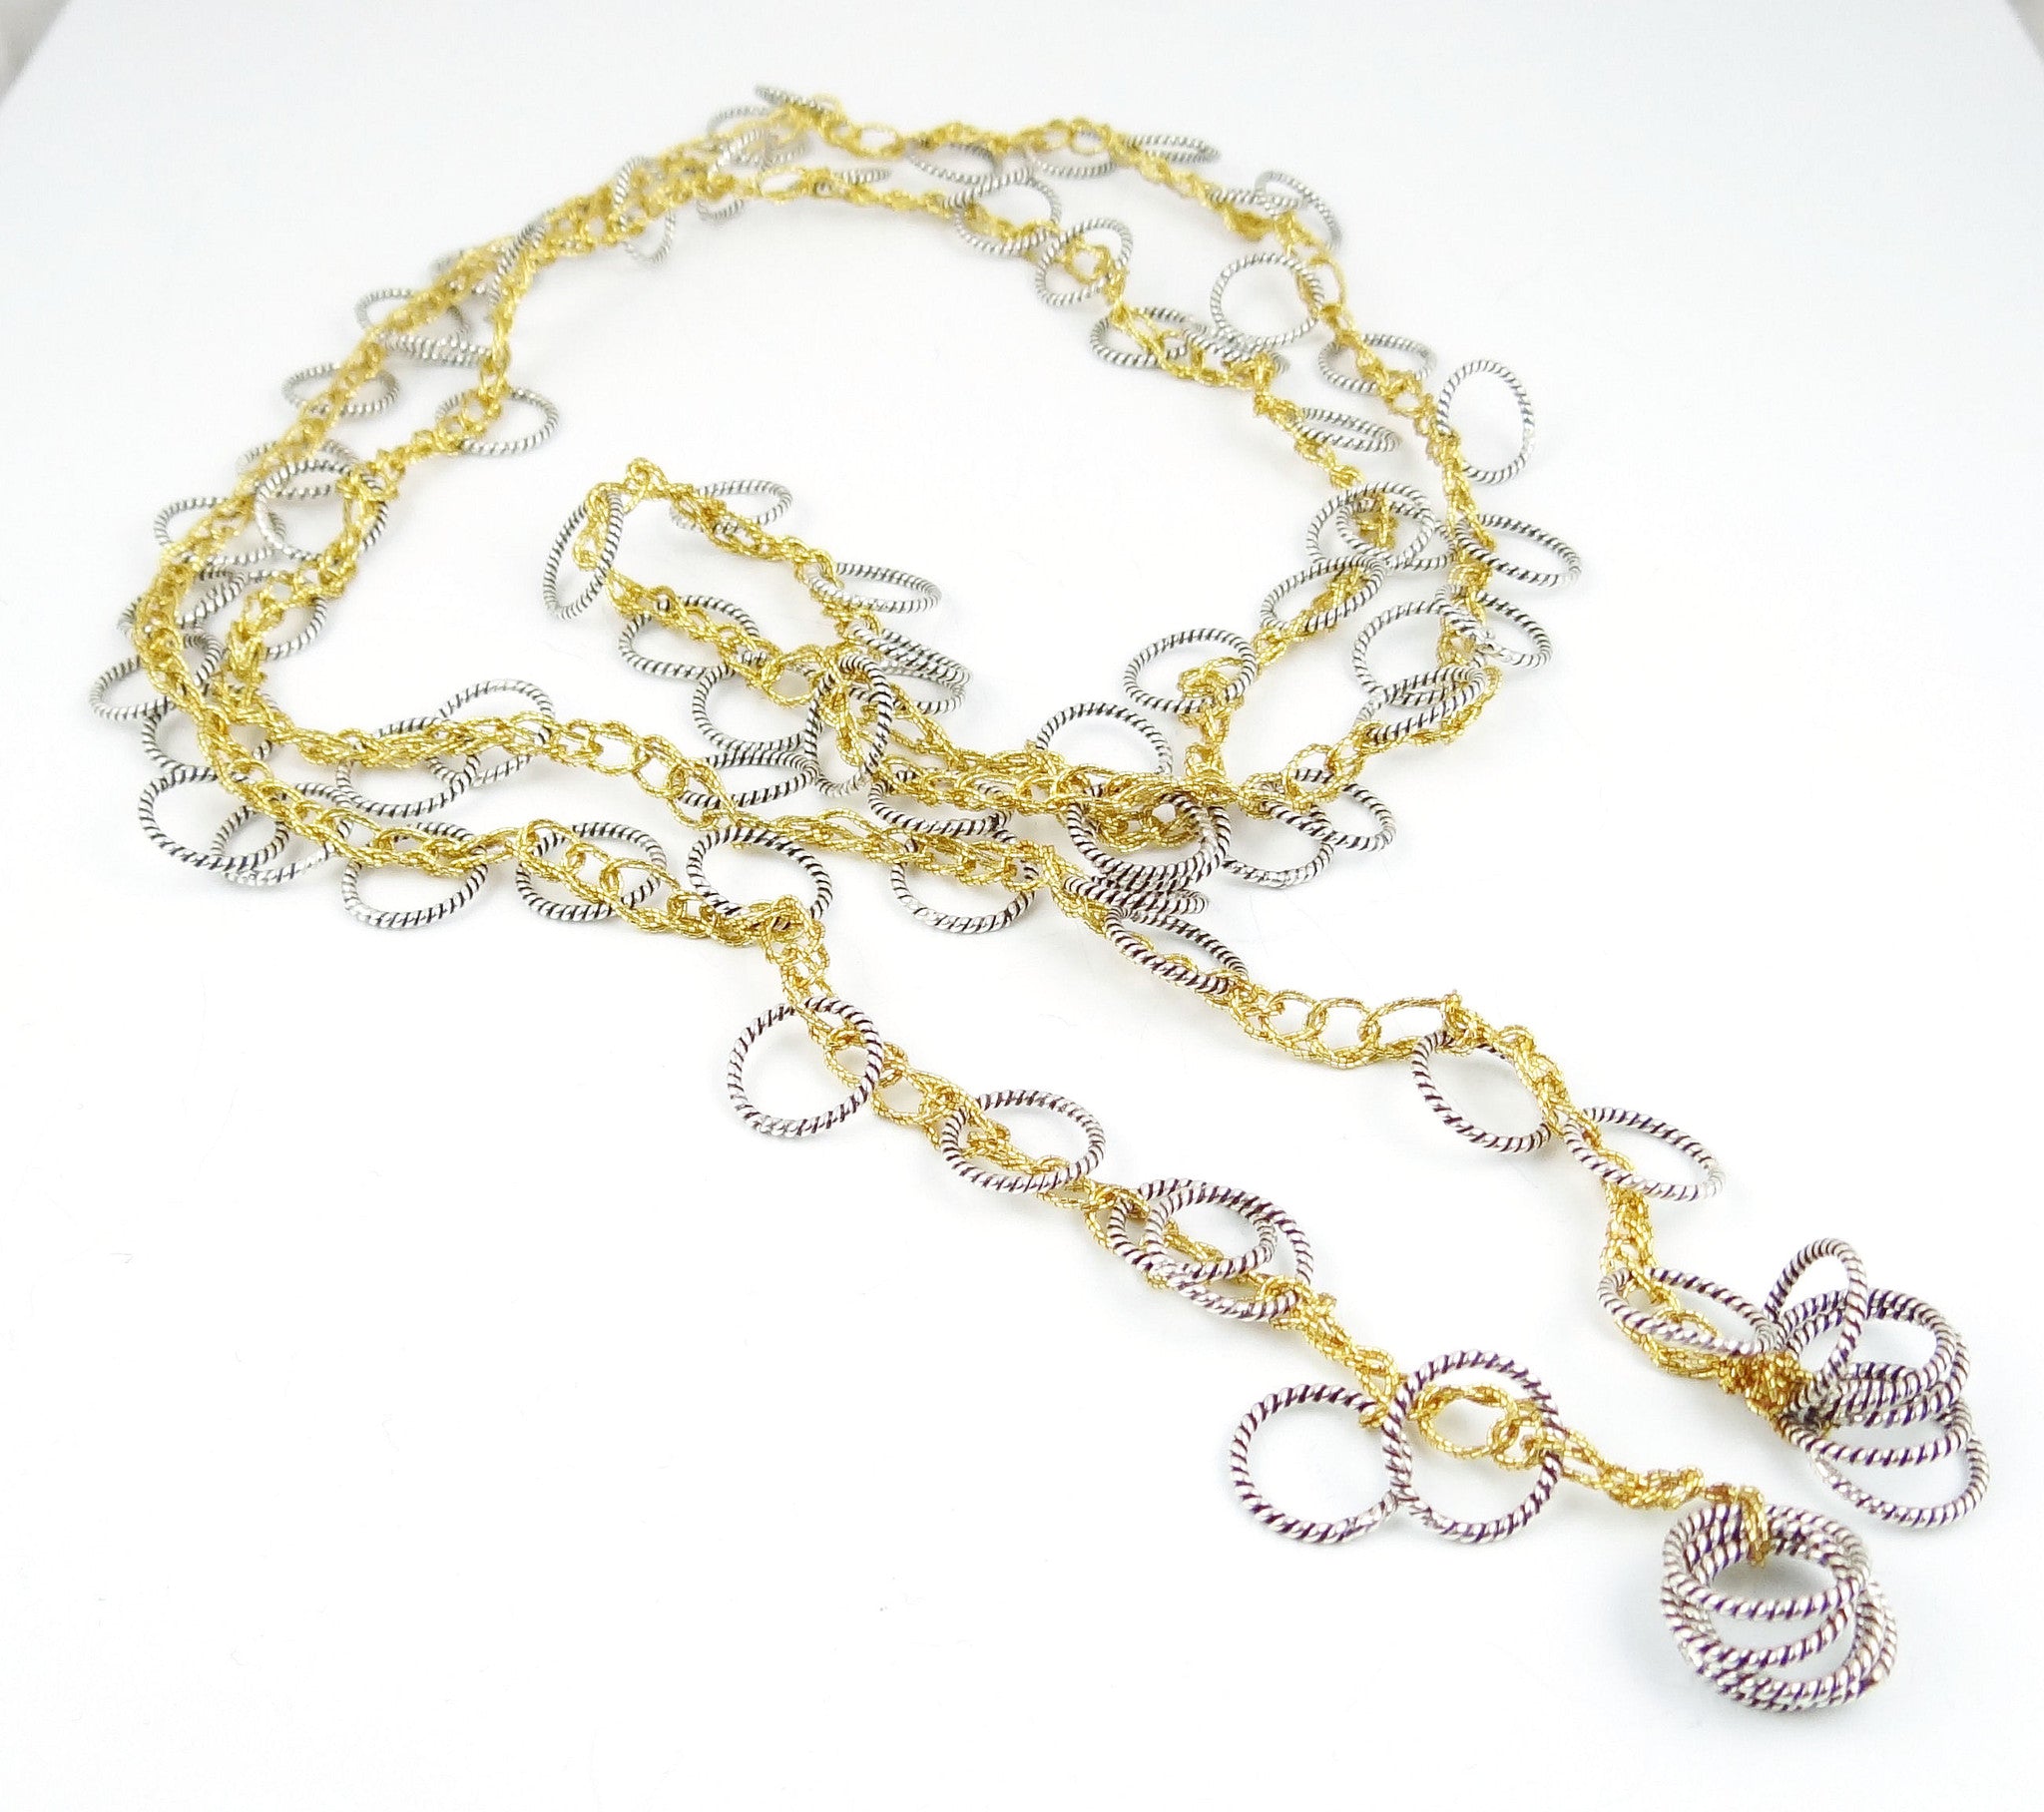 Mixed Metal Loopy Lariat Necklace